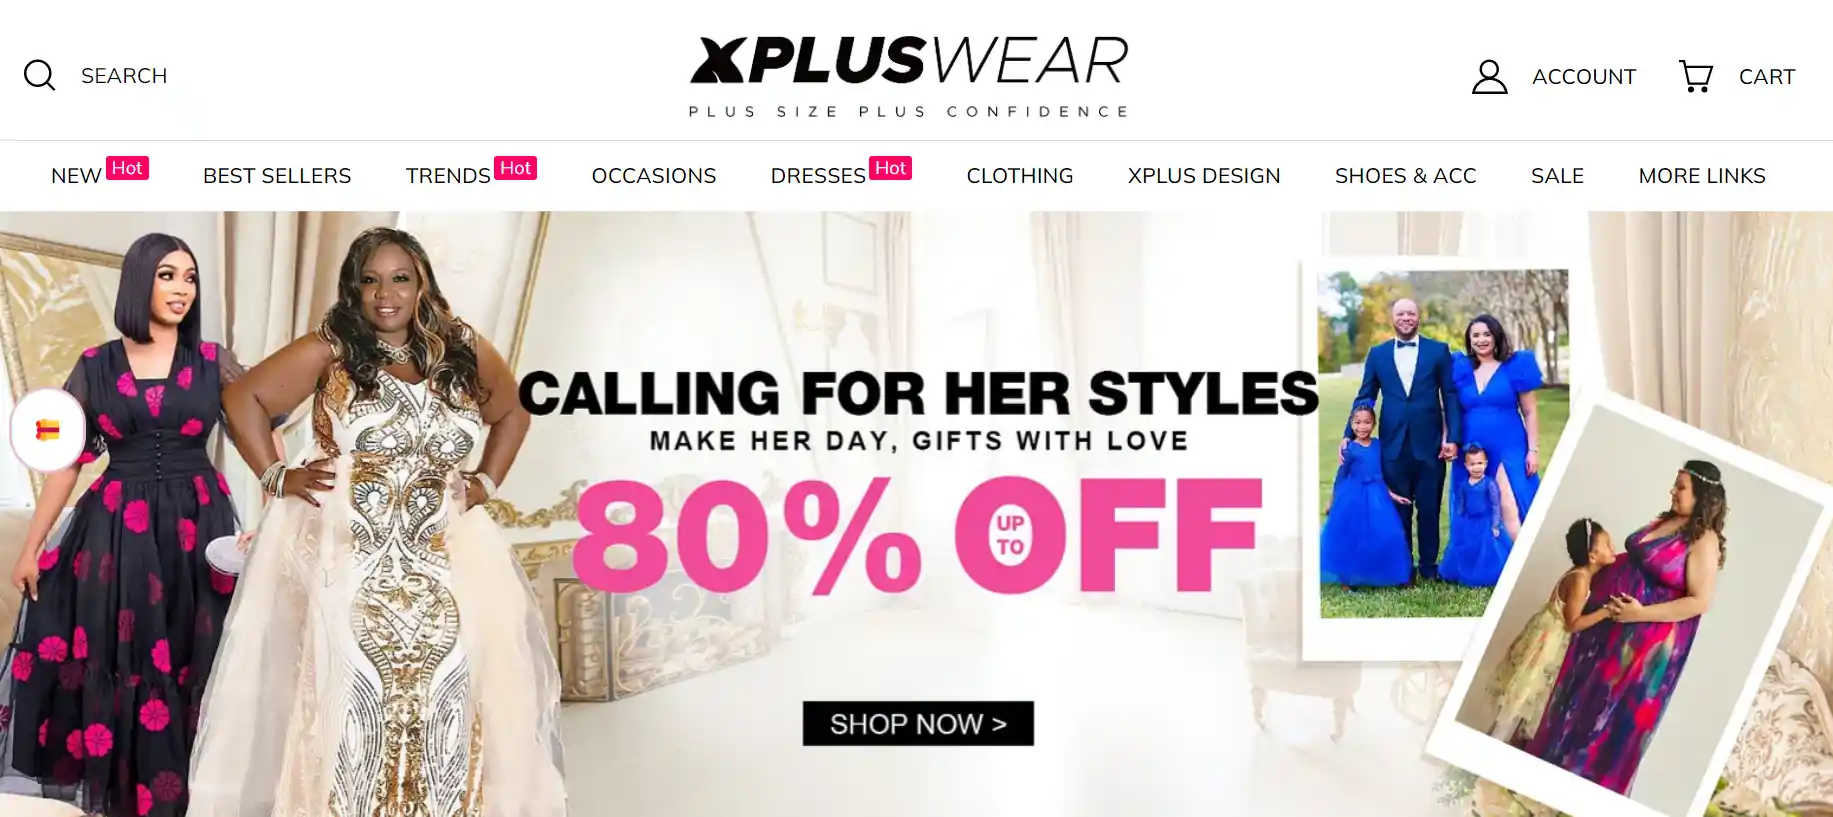 Xpluswear.com Review – Offering Best Plus Size Women Clothing or Another Scam Website?